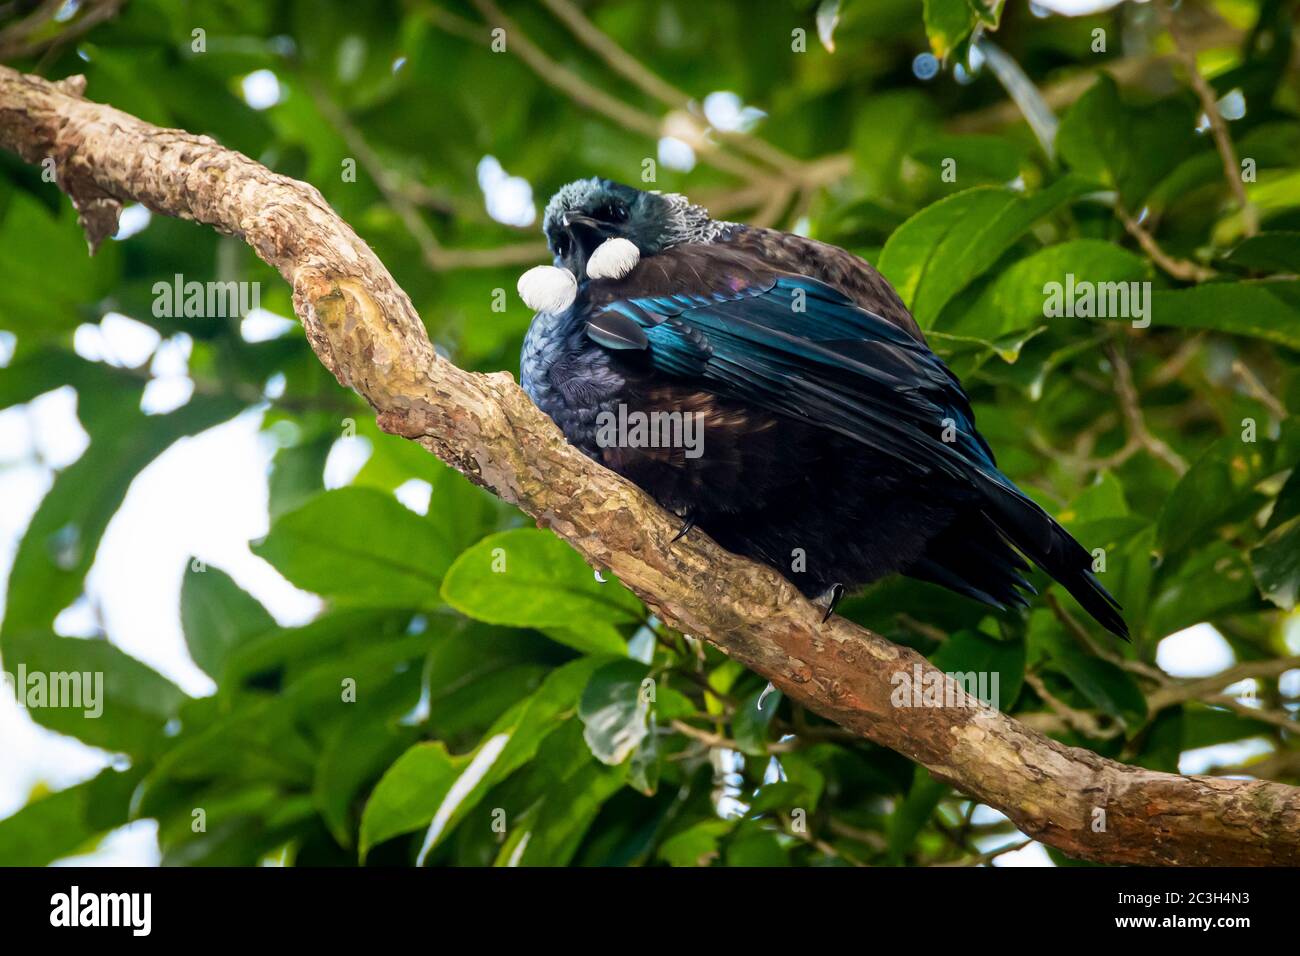 Tui perched on a branch at Zealandia wildlife reserve, Wellington, North Island, New Zealand Stock Photo